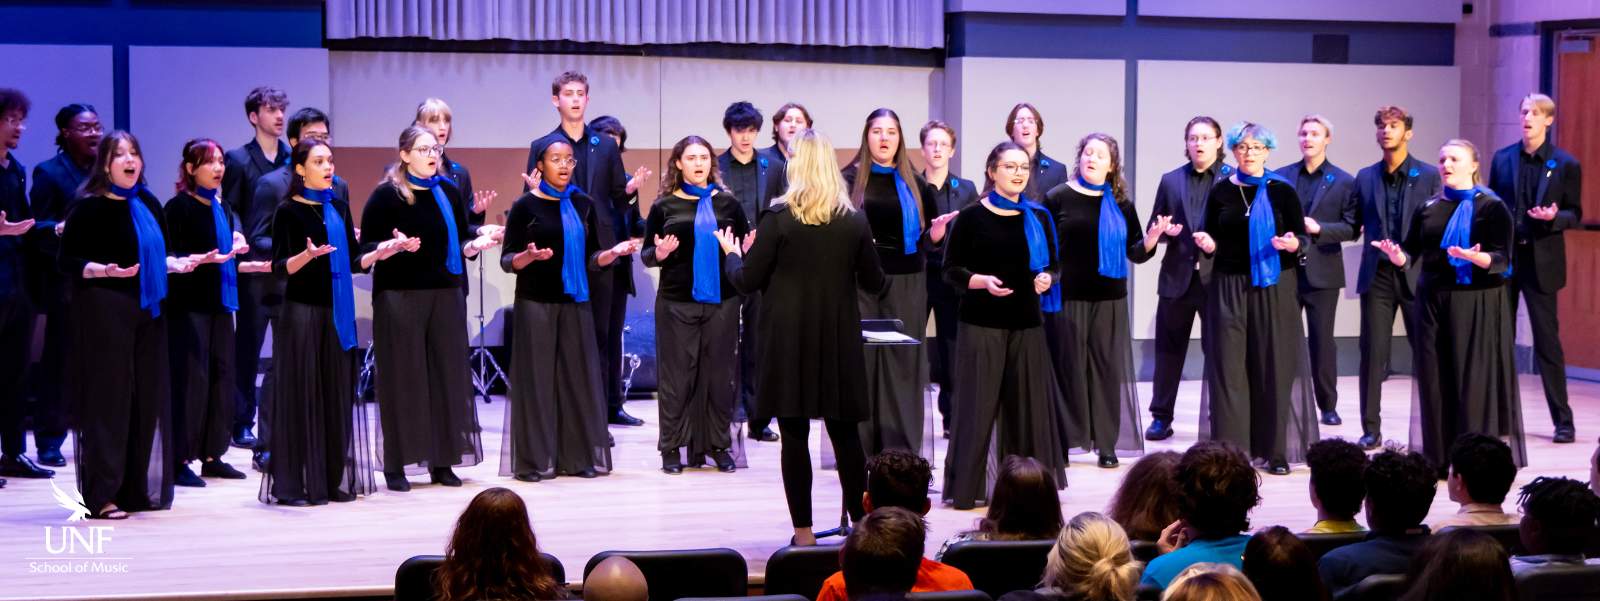 Singers on stage wearing black with blue stoles. 